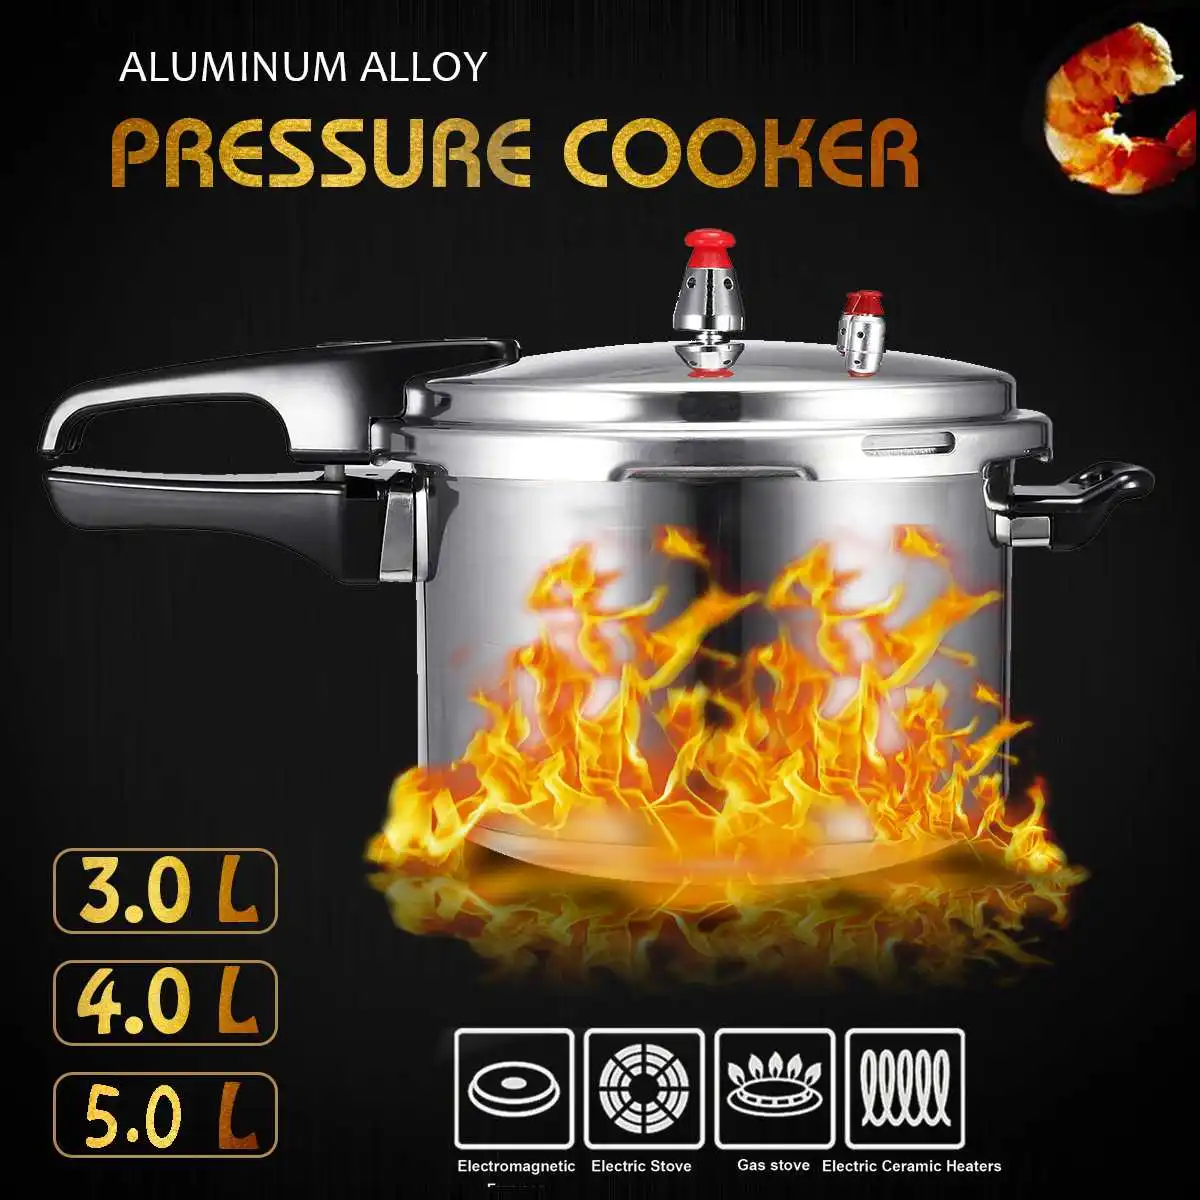 18cm KUAIZI Kitchen Pressure Cooker Aluminium Alloy Gas Stove Cooking Energy-Saving Safety Camping Outdoor Cookware 